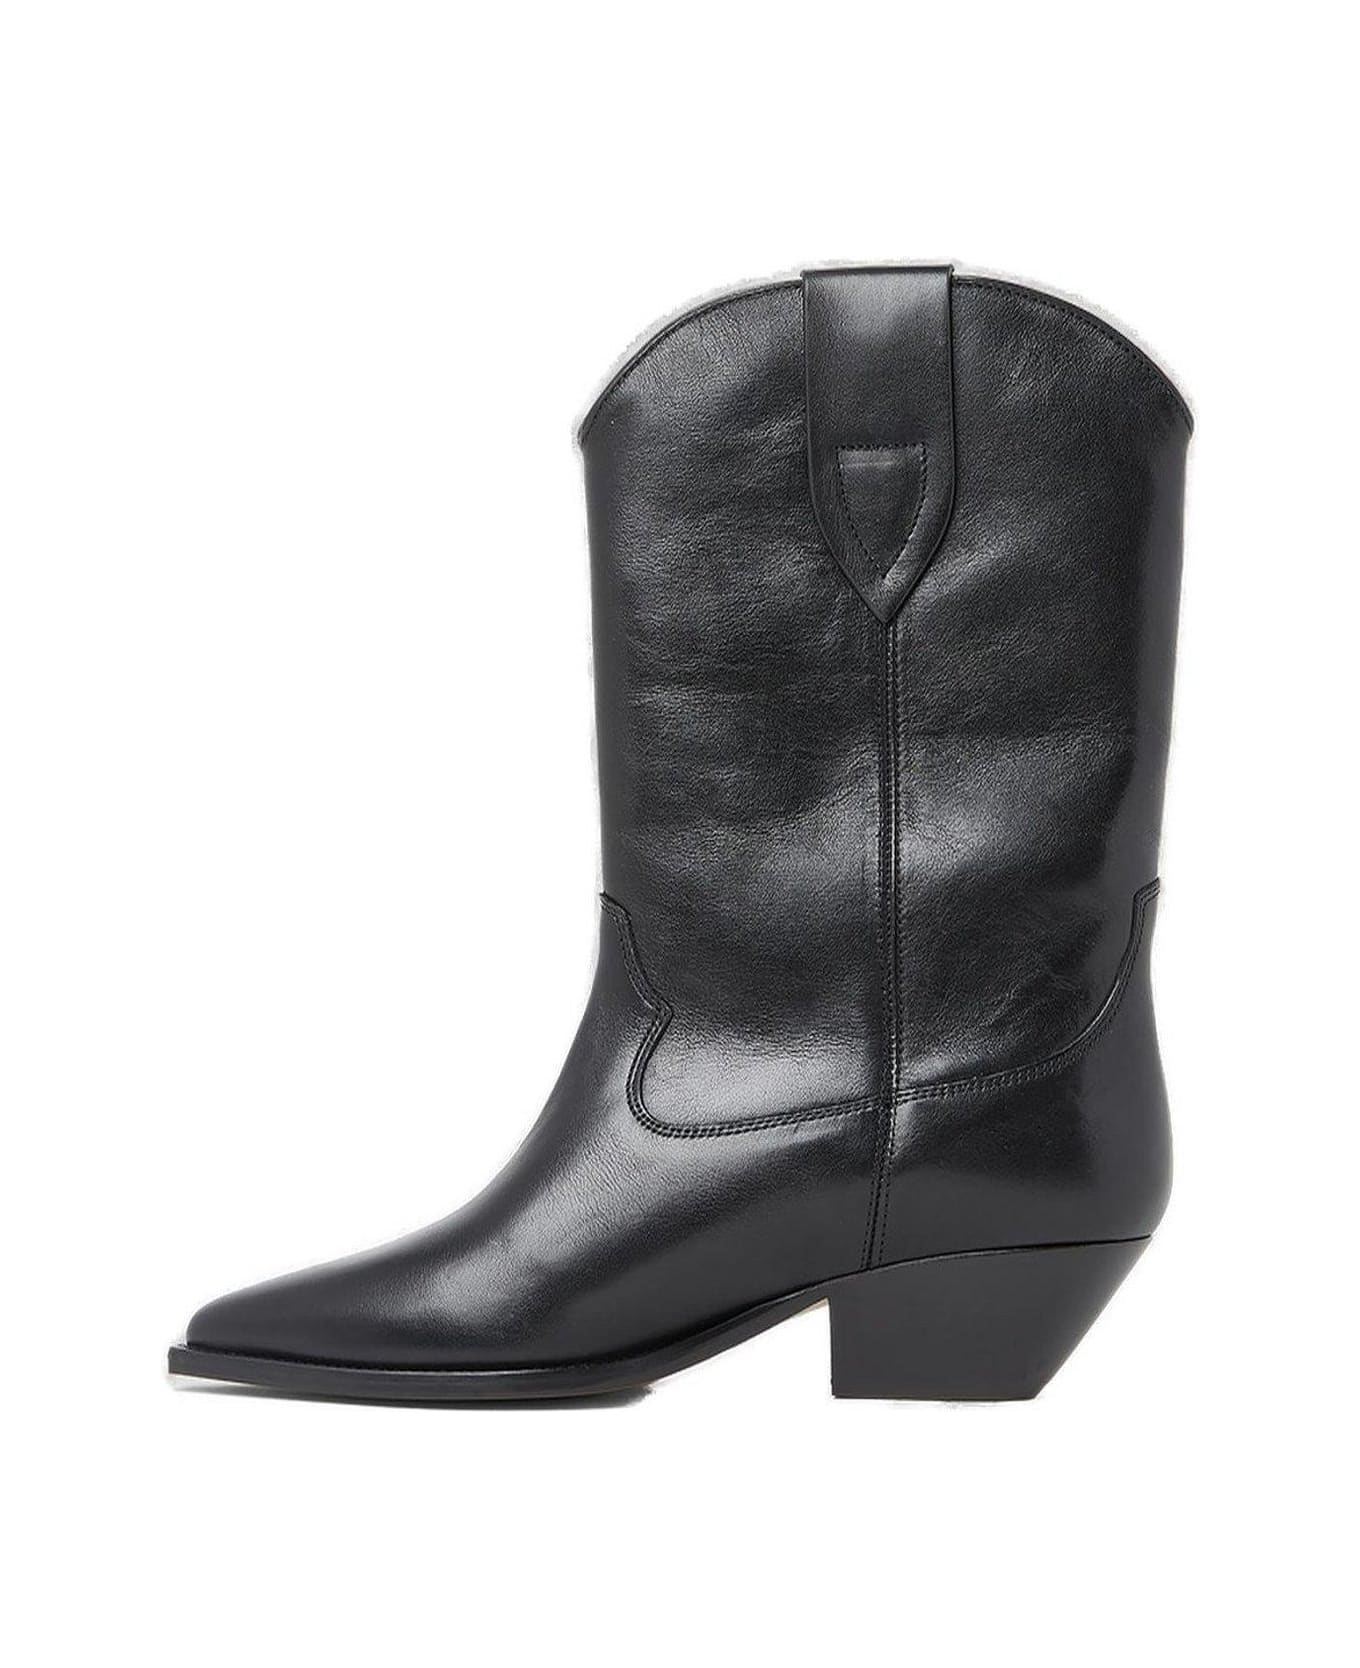 Isabel Marant Pointed Toe Block Heel Ankle Boots - Black ブーツ